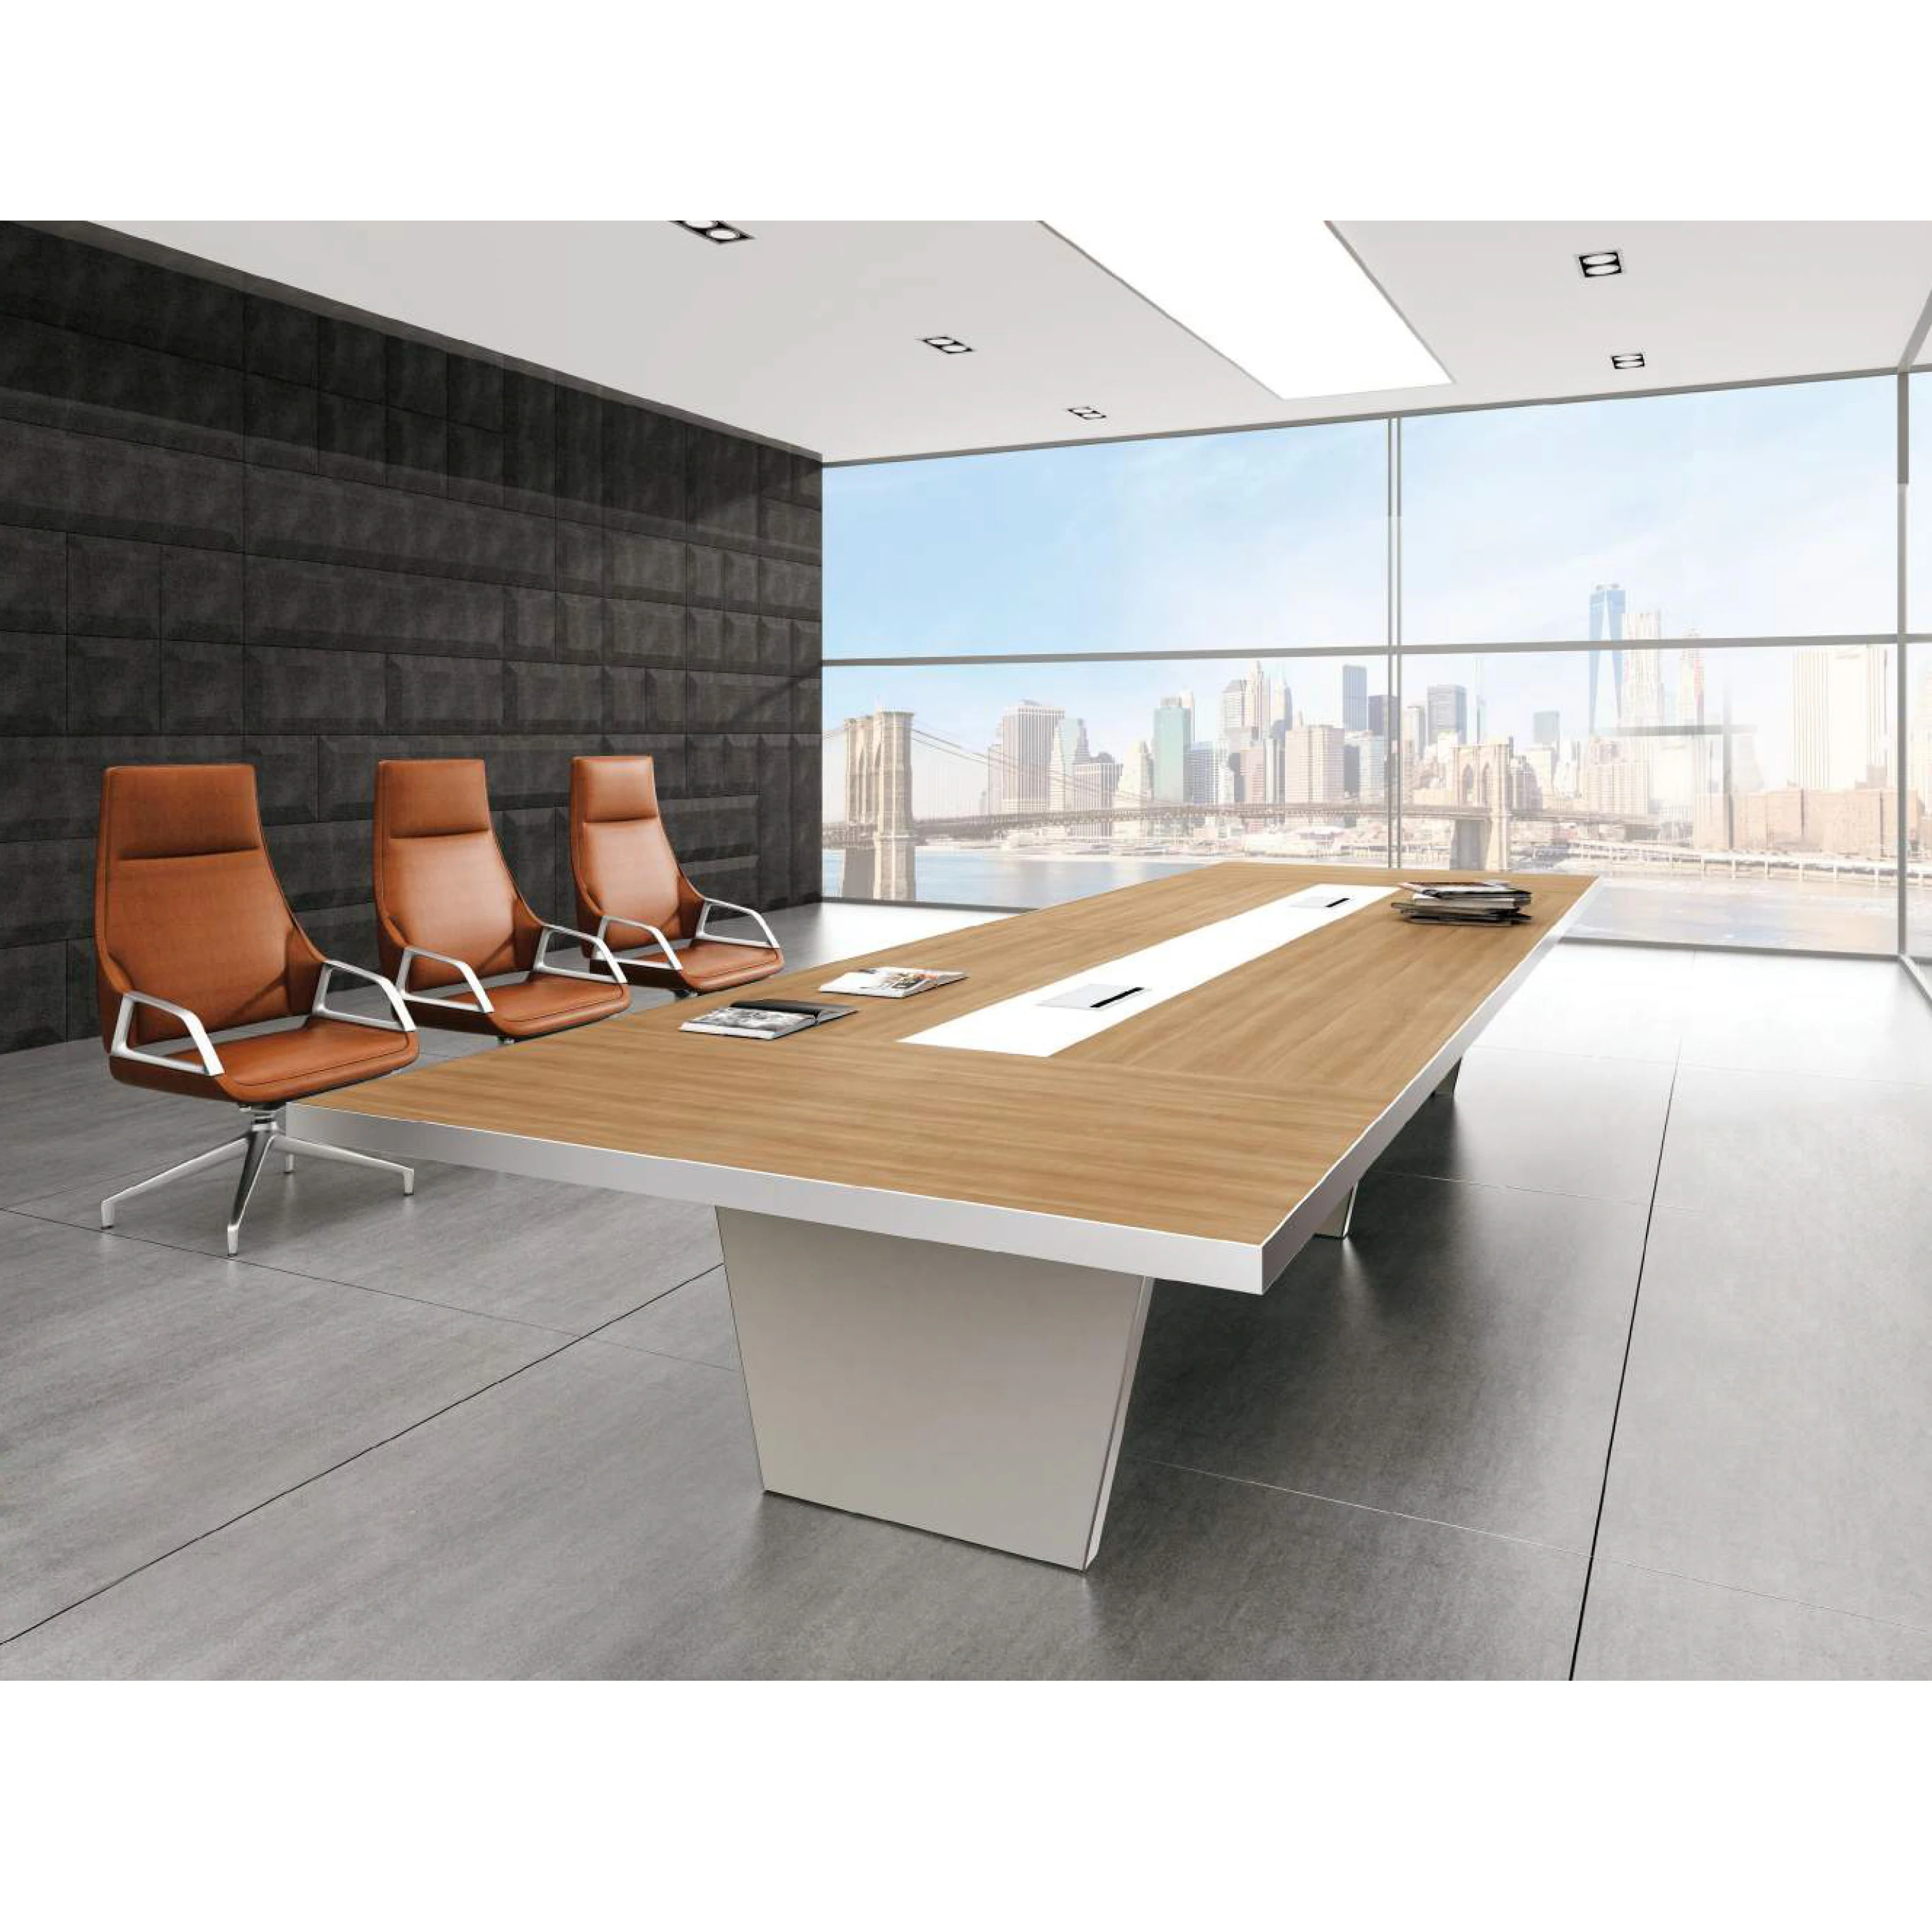 Modern Meeting Table Design Conference Room Table Modern Conference Table with Outlets